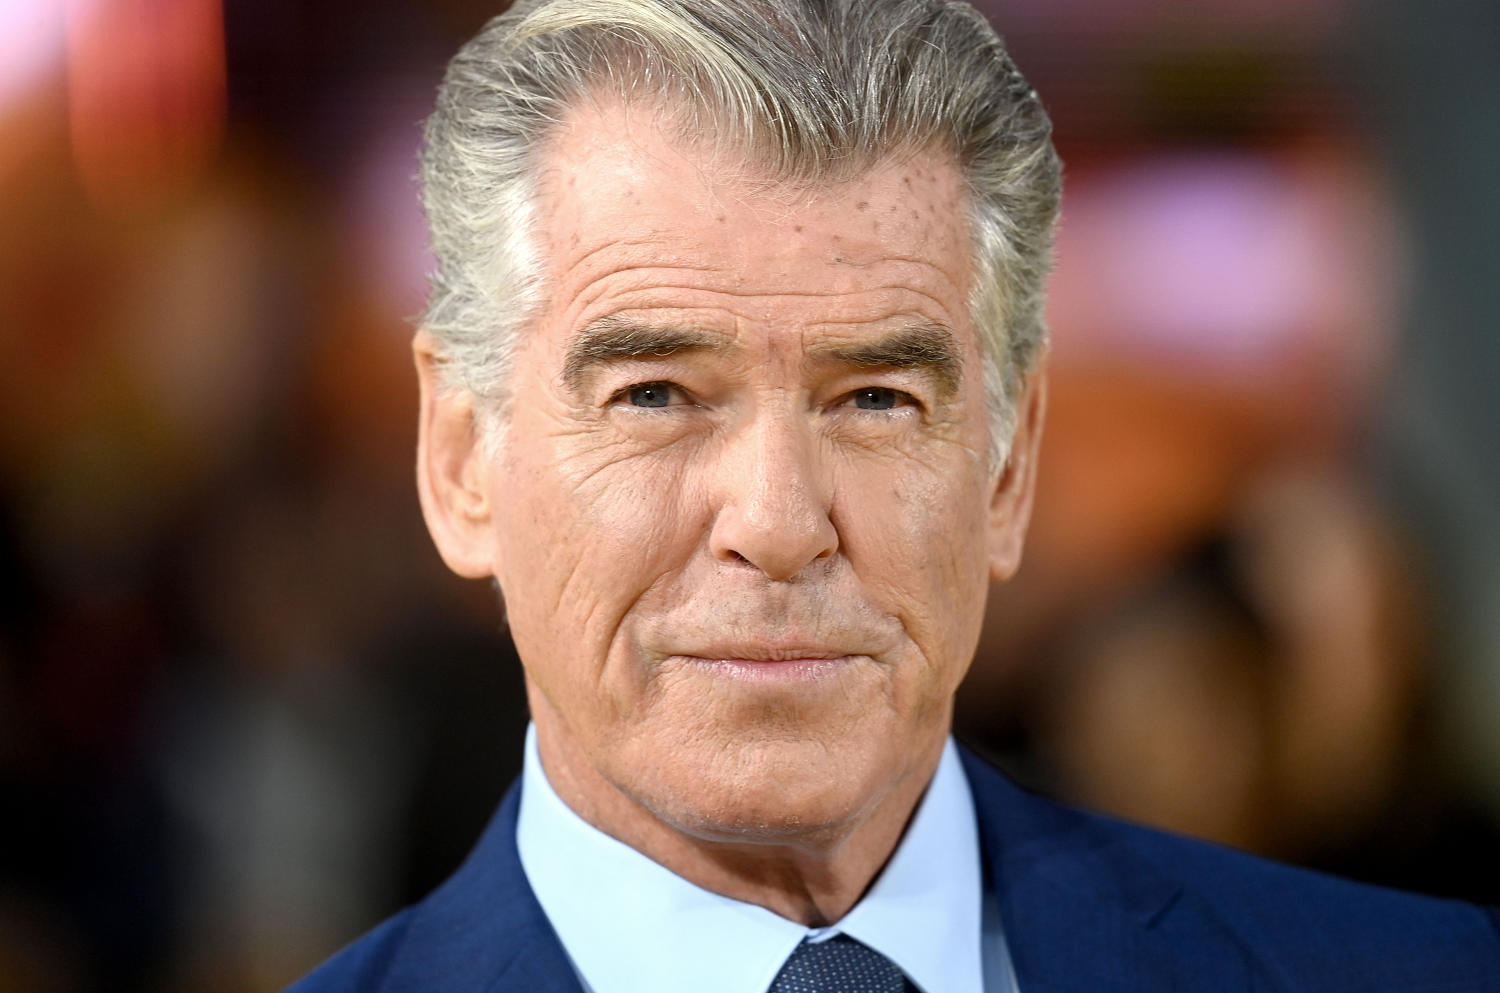 Pierce Brosnan pleads not guilty after federal citations at Yellowstone